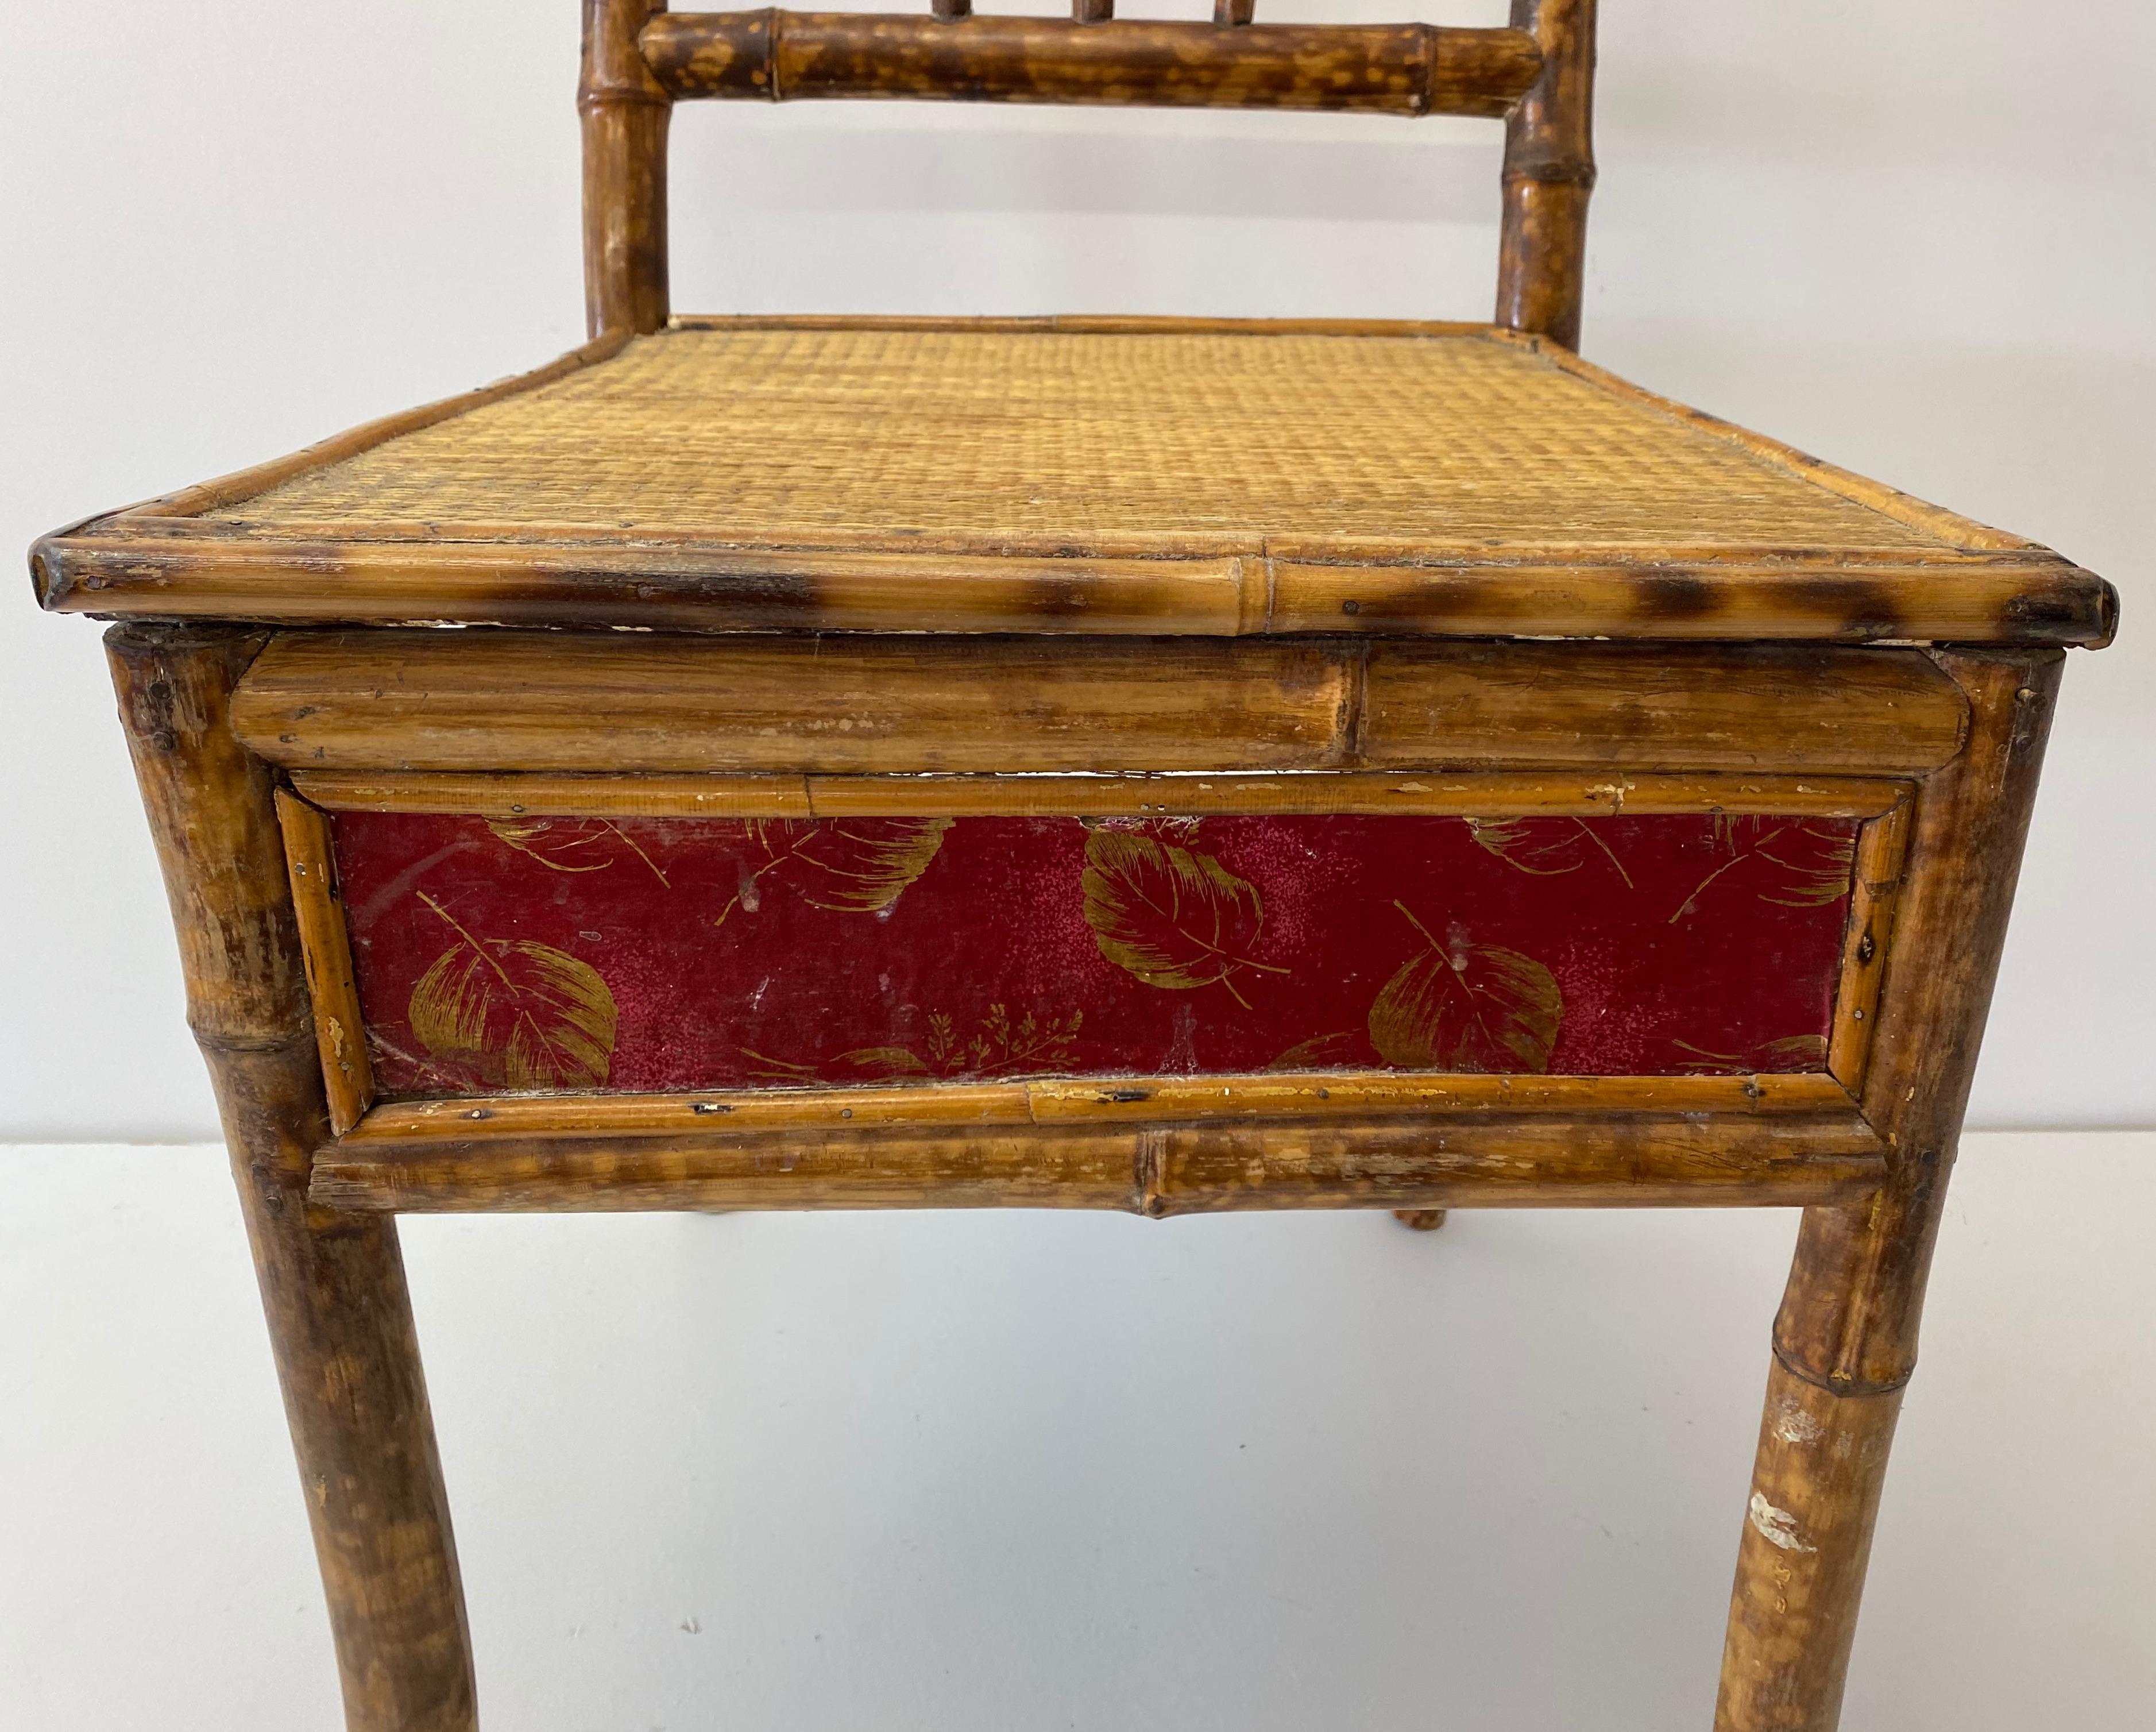 Late 19th century bamboo & cane Victorian bedroom chair, C.1890

Outstanding English Victorian bamboo chair with woven cane seat

Hand painted detail along the front and back

Eighteenth century enthusiasm for exotic furniture eventually lead